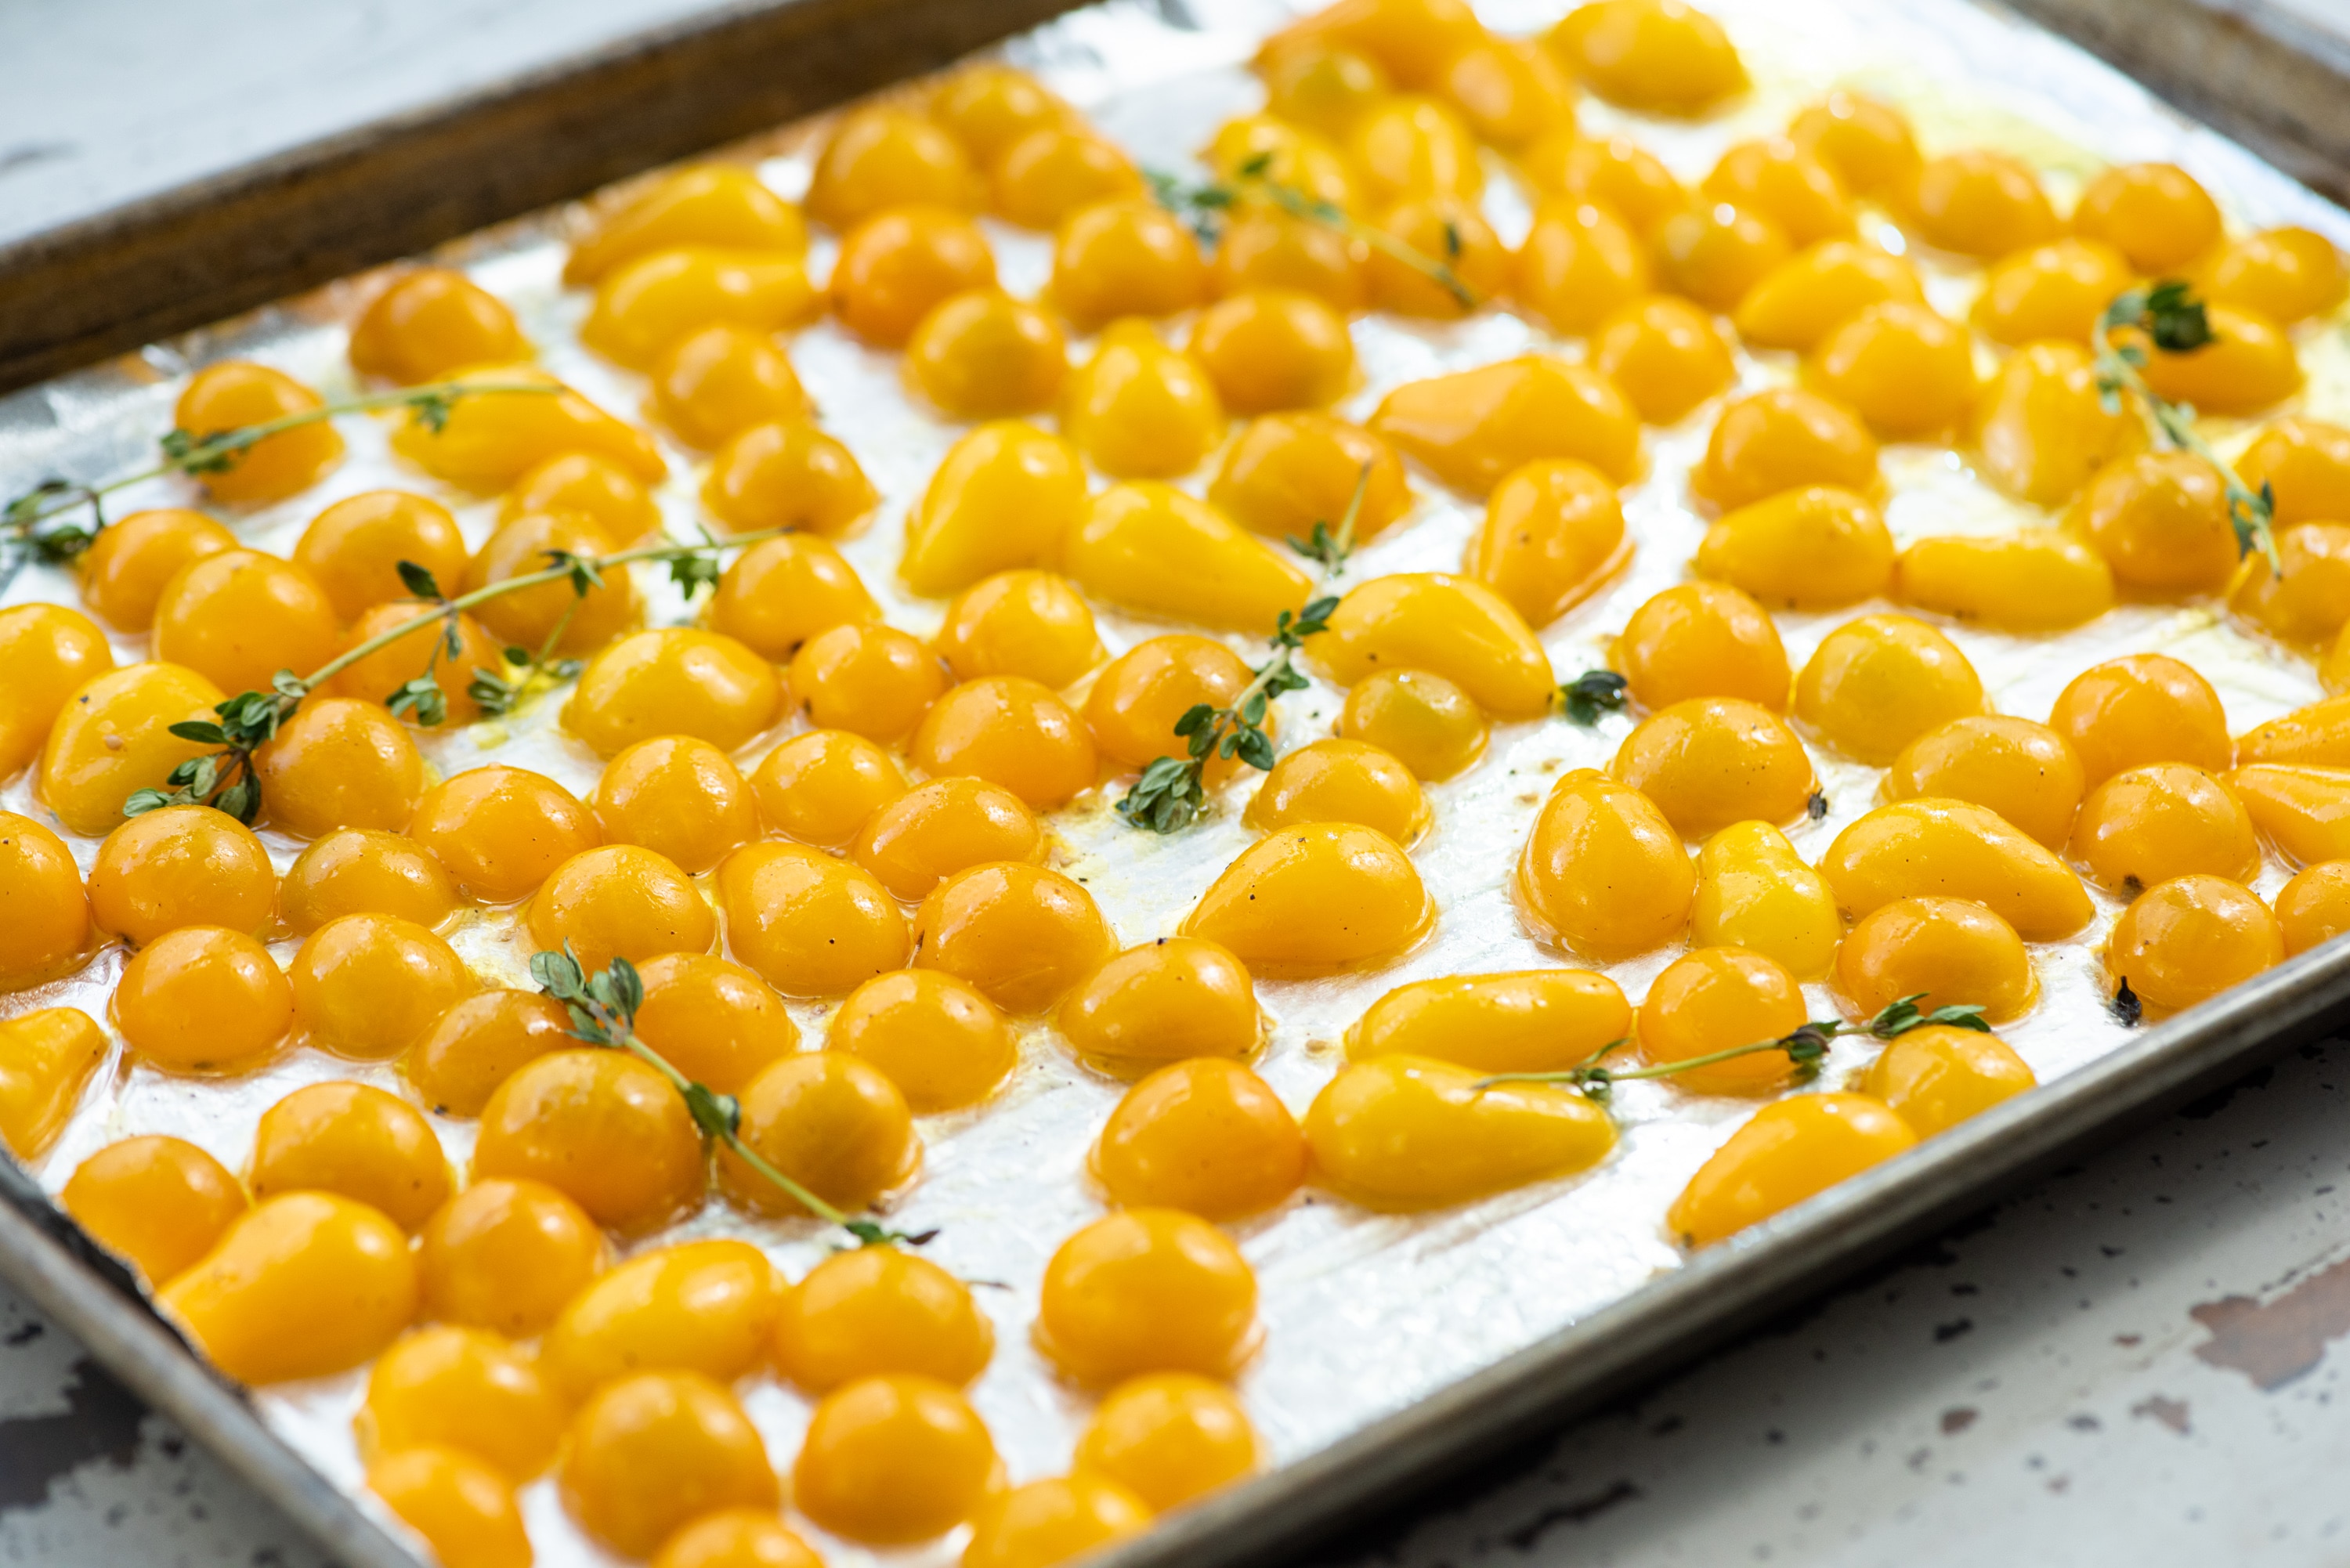 yellow tomatoes about to be roasted Katie Workman/Cheyenne Cohen